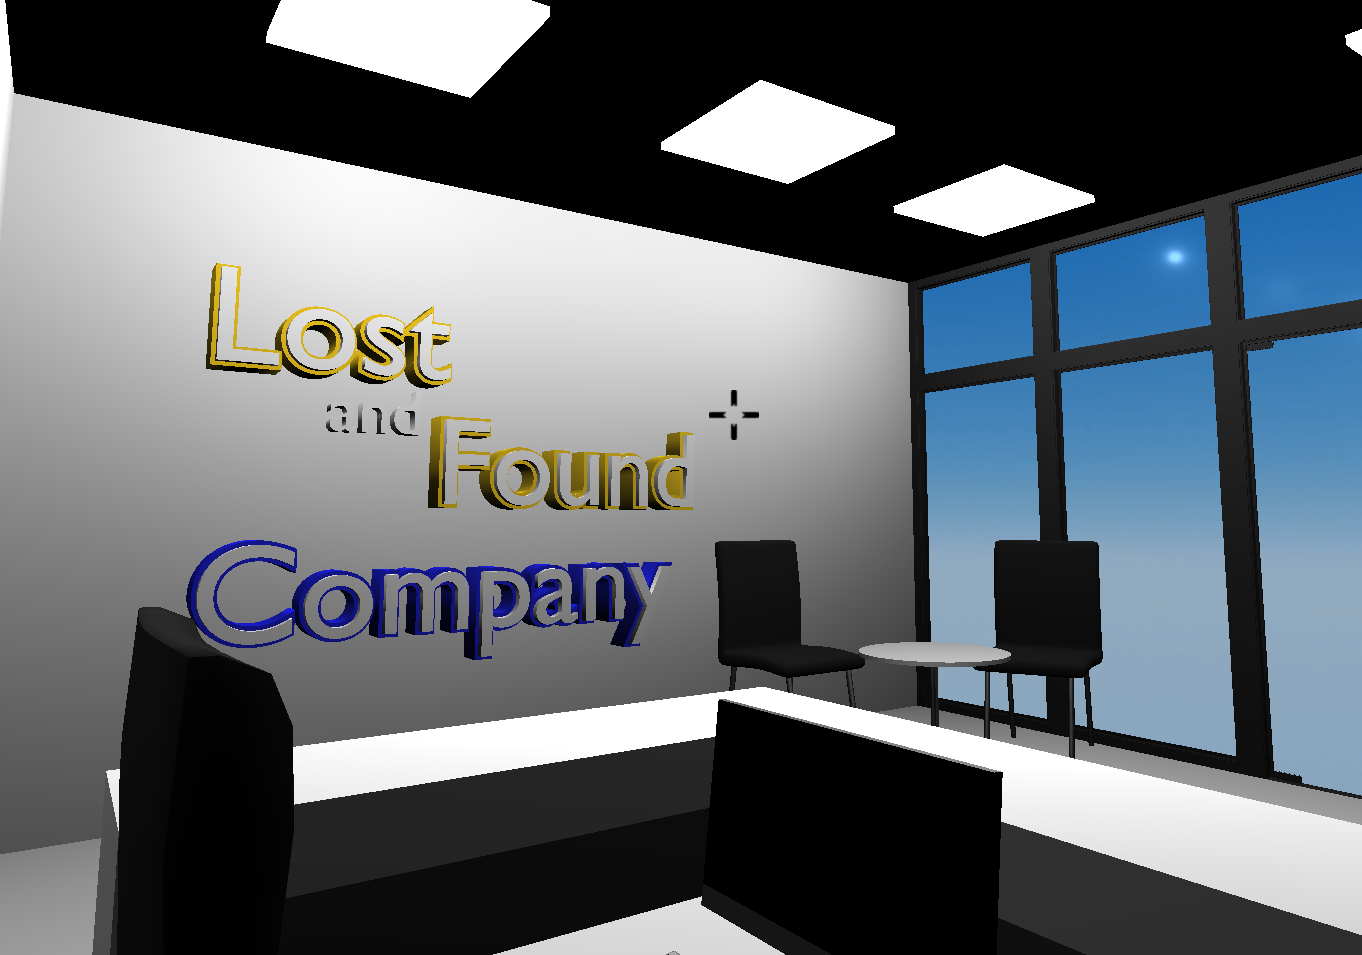 You found a job but lost your freedom - Global Game Jam 2021 Online